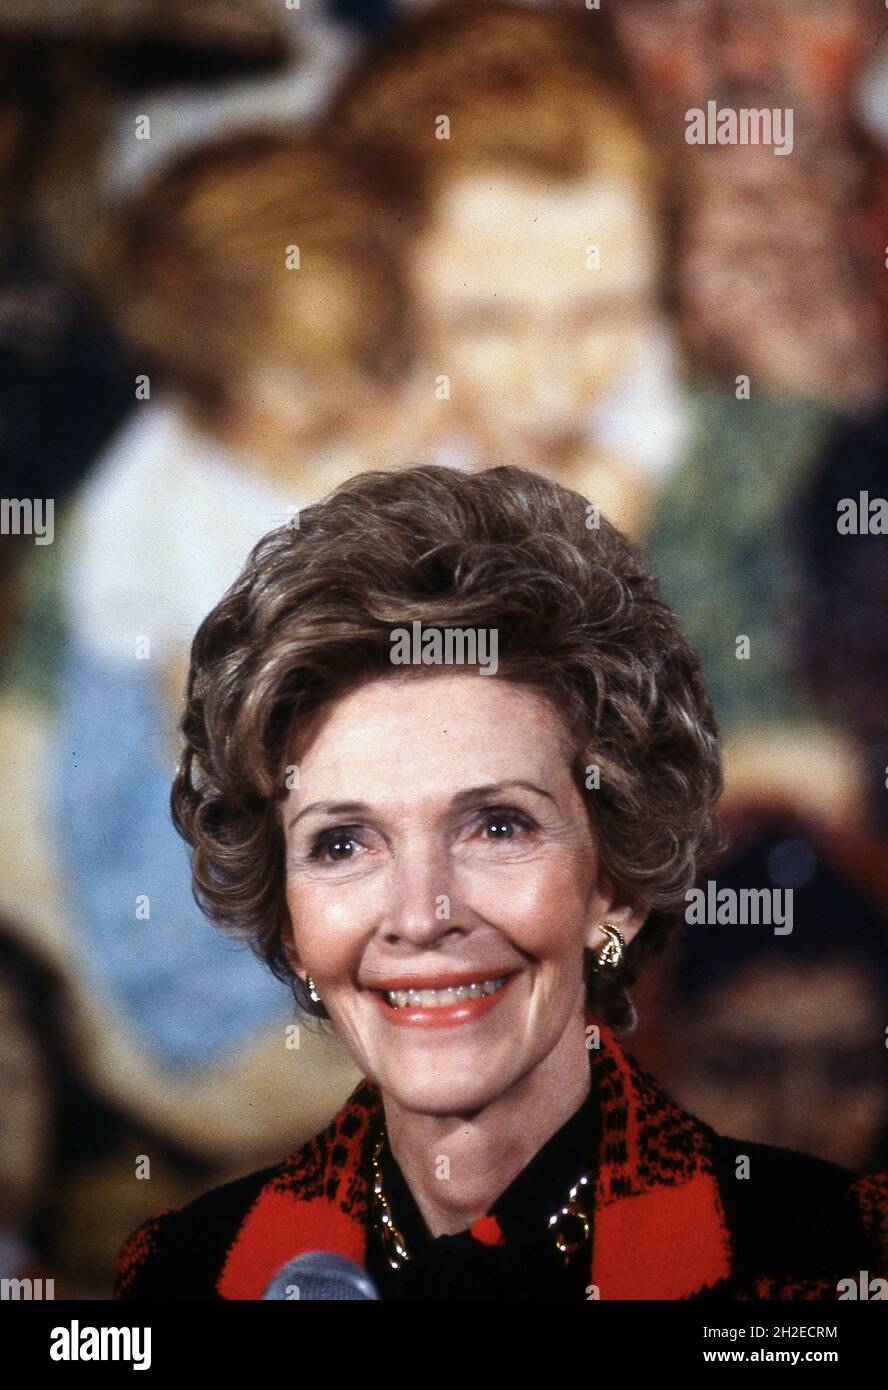 First Lady Nancy Reagan at a Unitedd Nations function in October 1985  Photograph by Dennis Brack BB79 Stock Photo